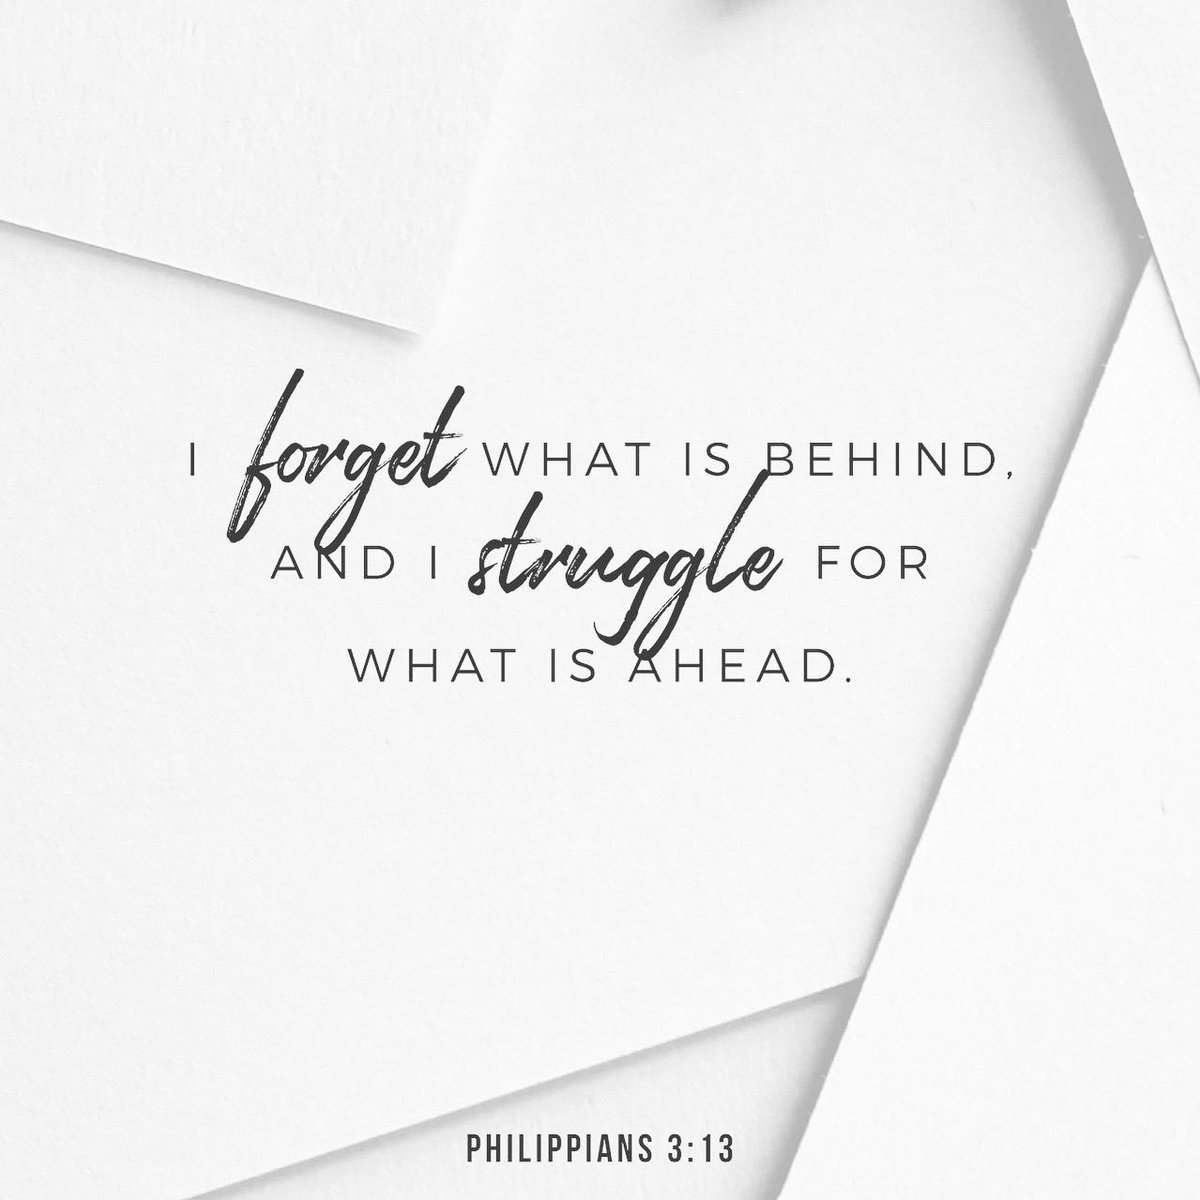 “One thing I do: Forgetting what is behind and straining toward what is ahead, I press on toward the goal to win the prize for which God has called me heavenward in Christ Jesus.” Philippians 3:13b-14 
#MondayMotivation #MotivationMonday #moveforward #forwardpress #forward